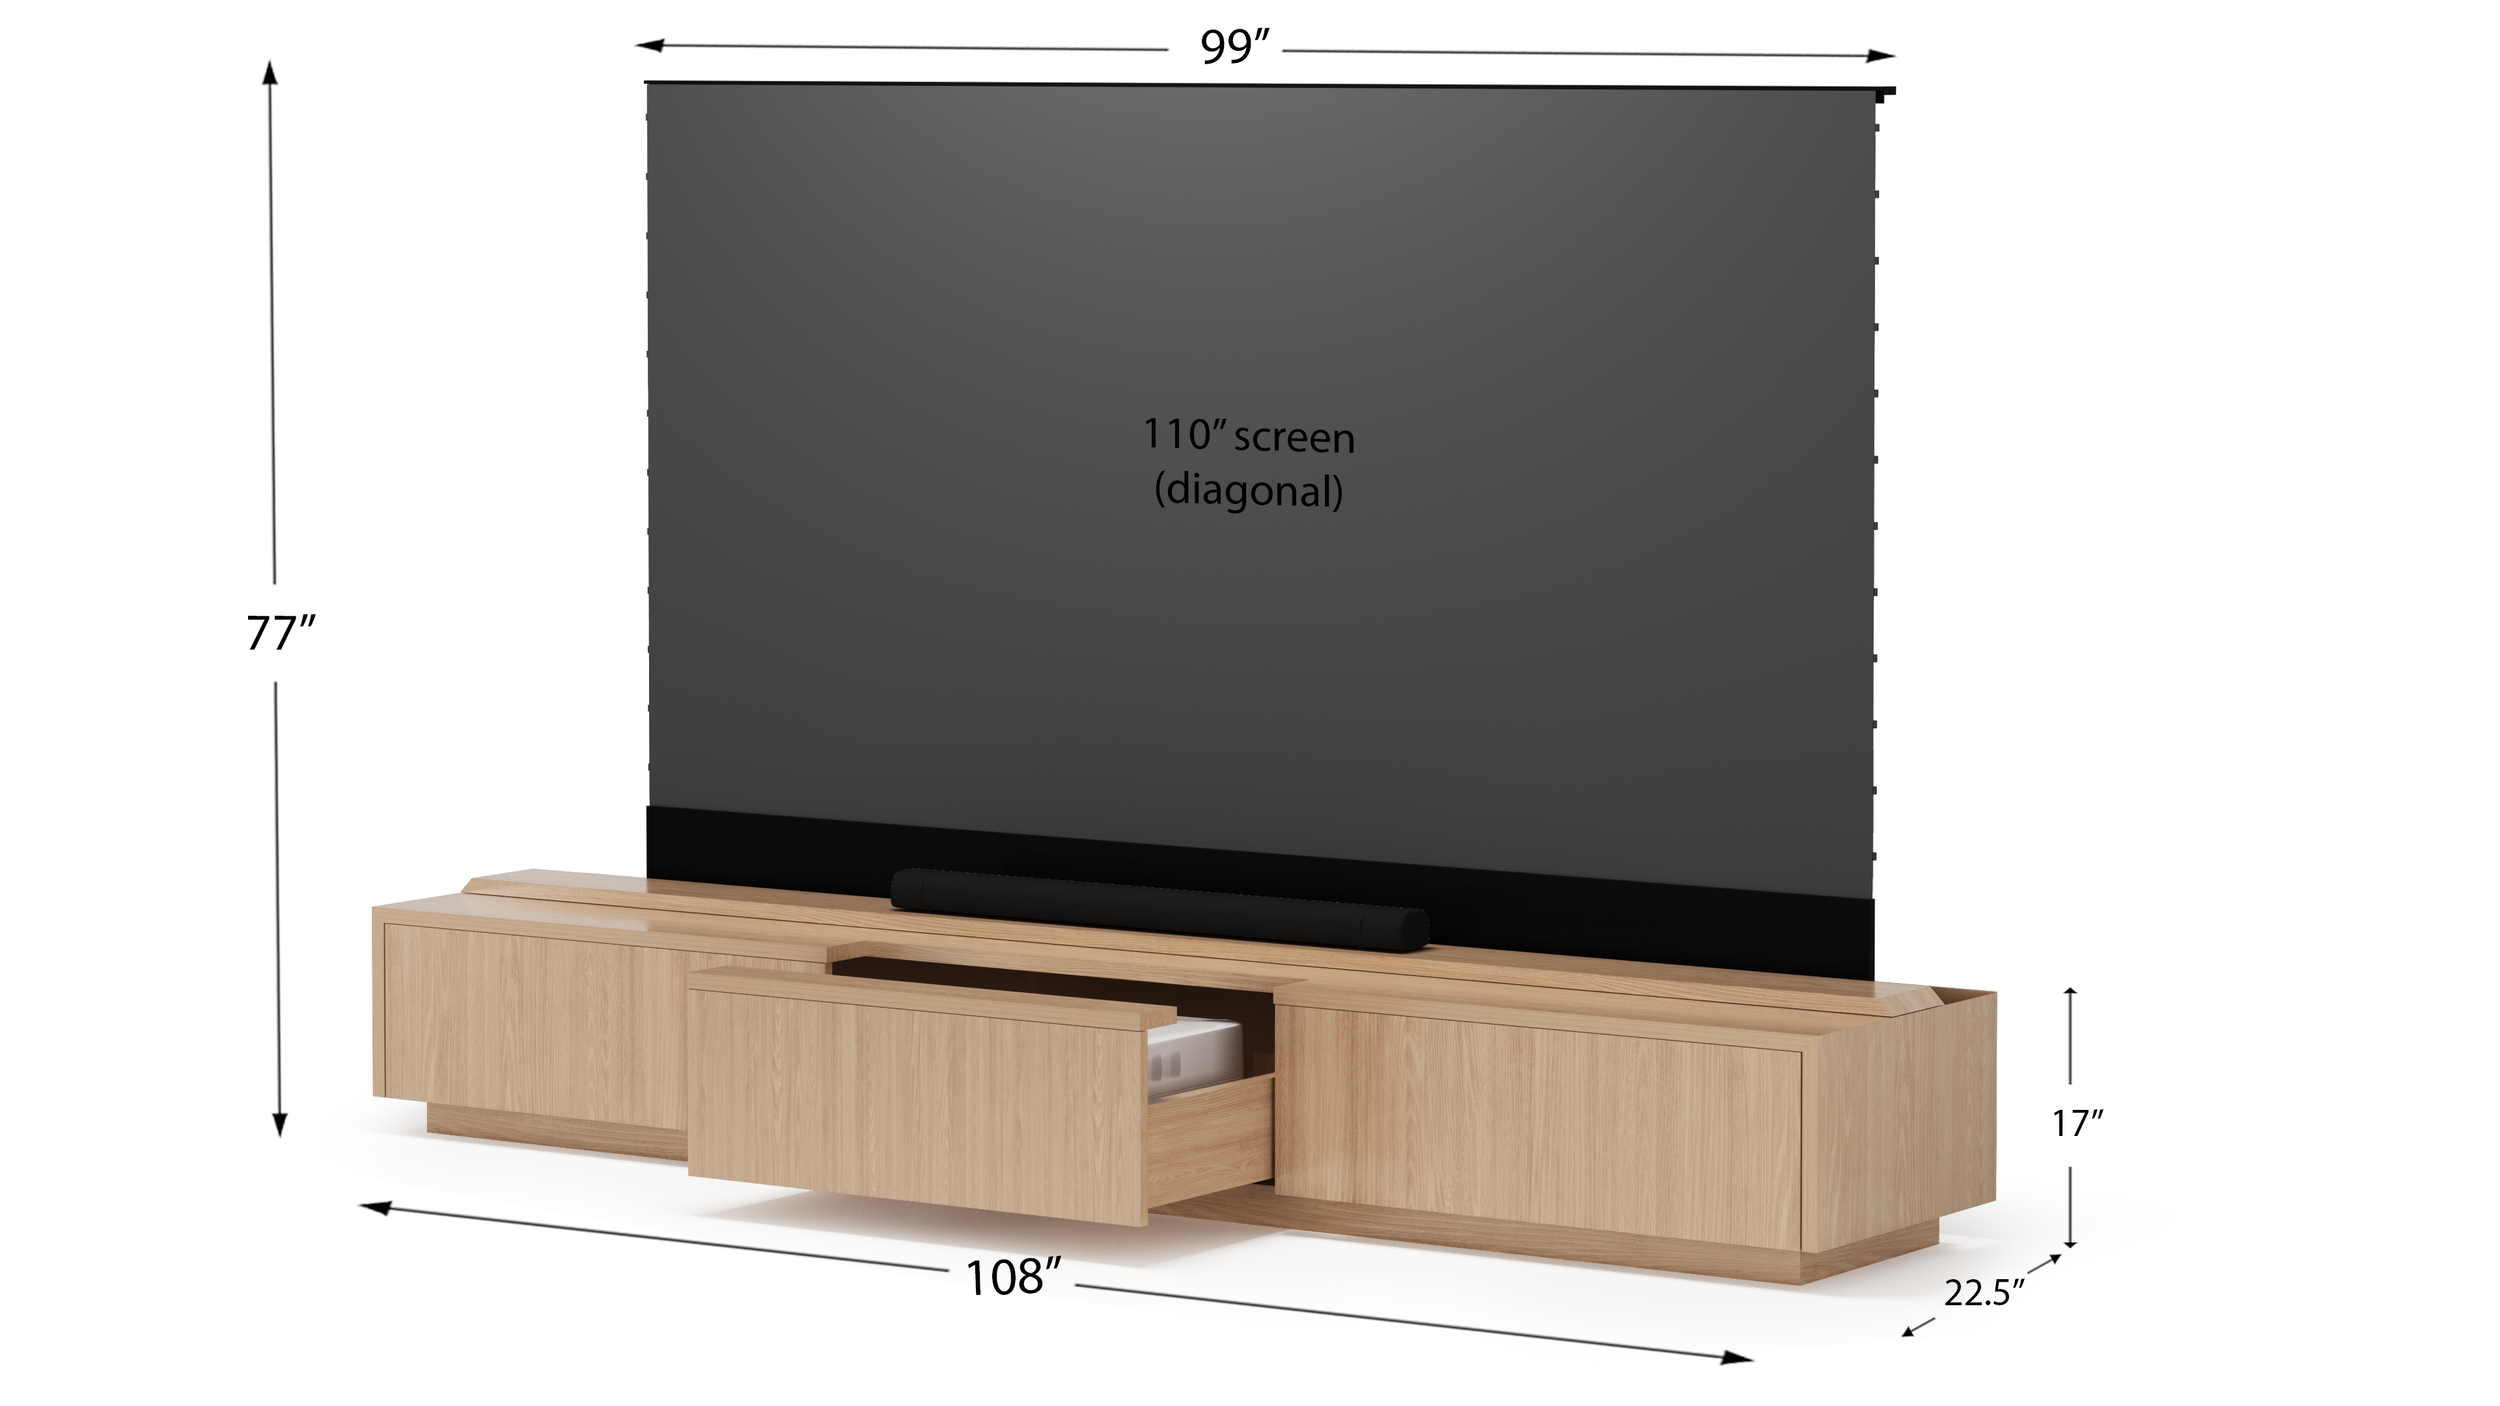 Render Dimensions 110 inch screen (2).png